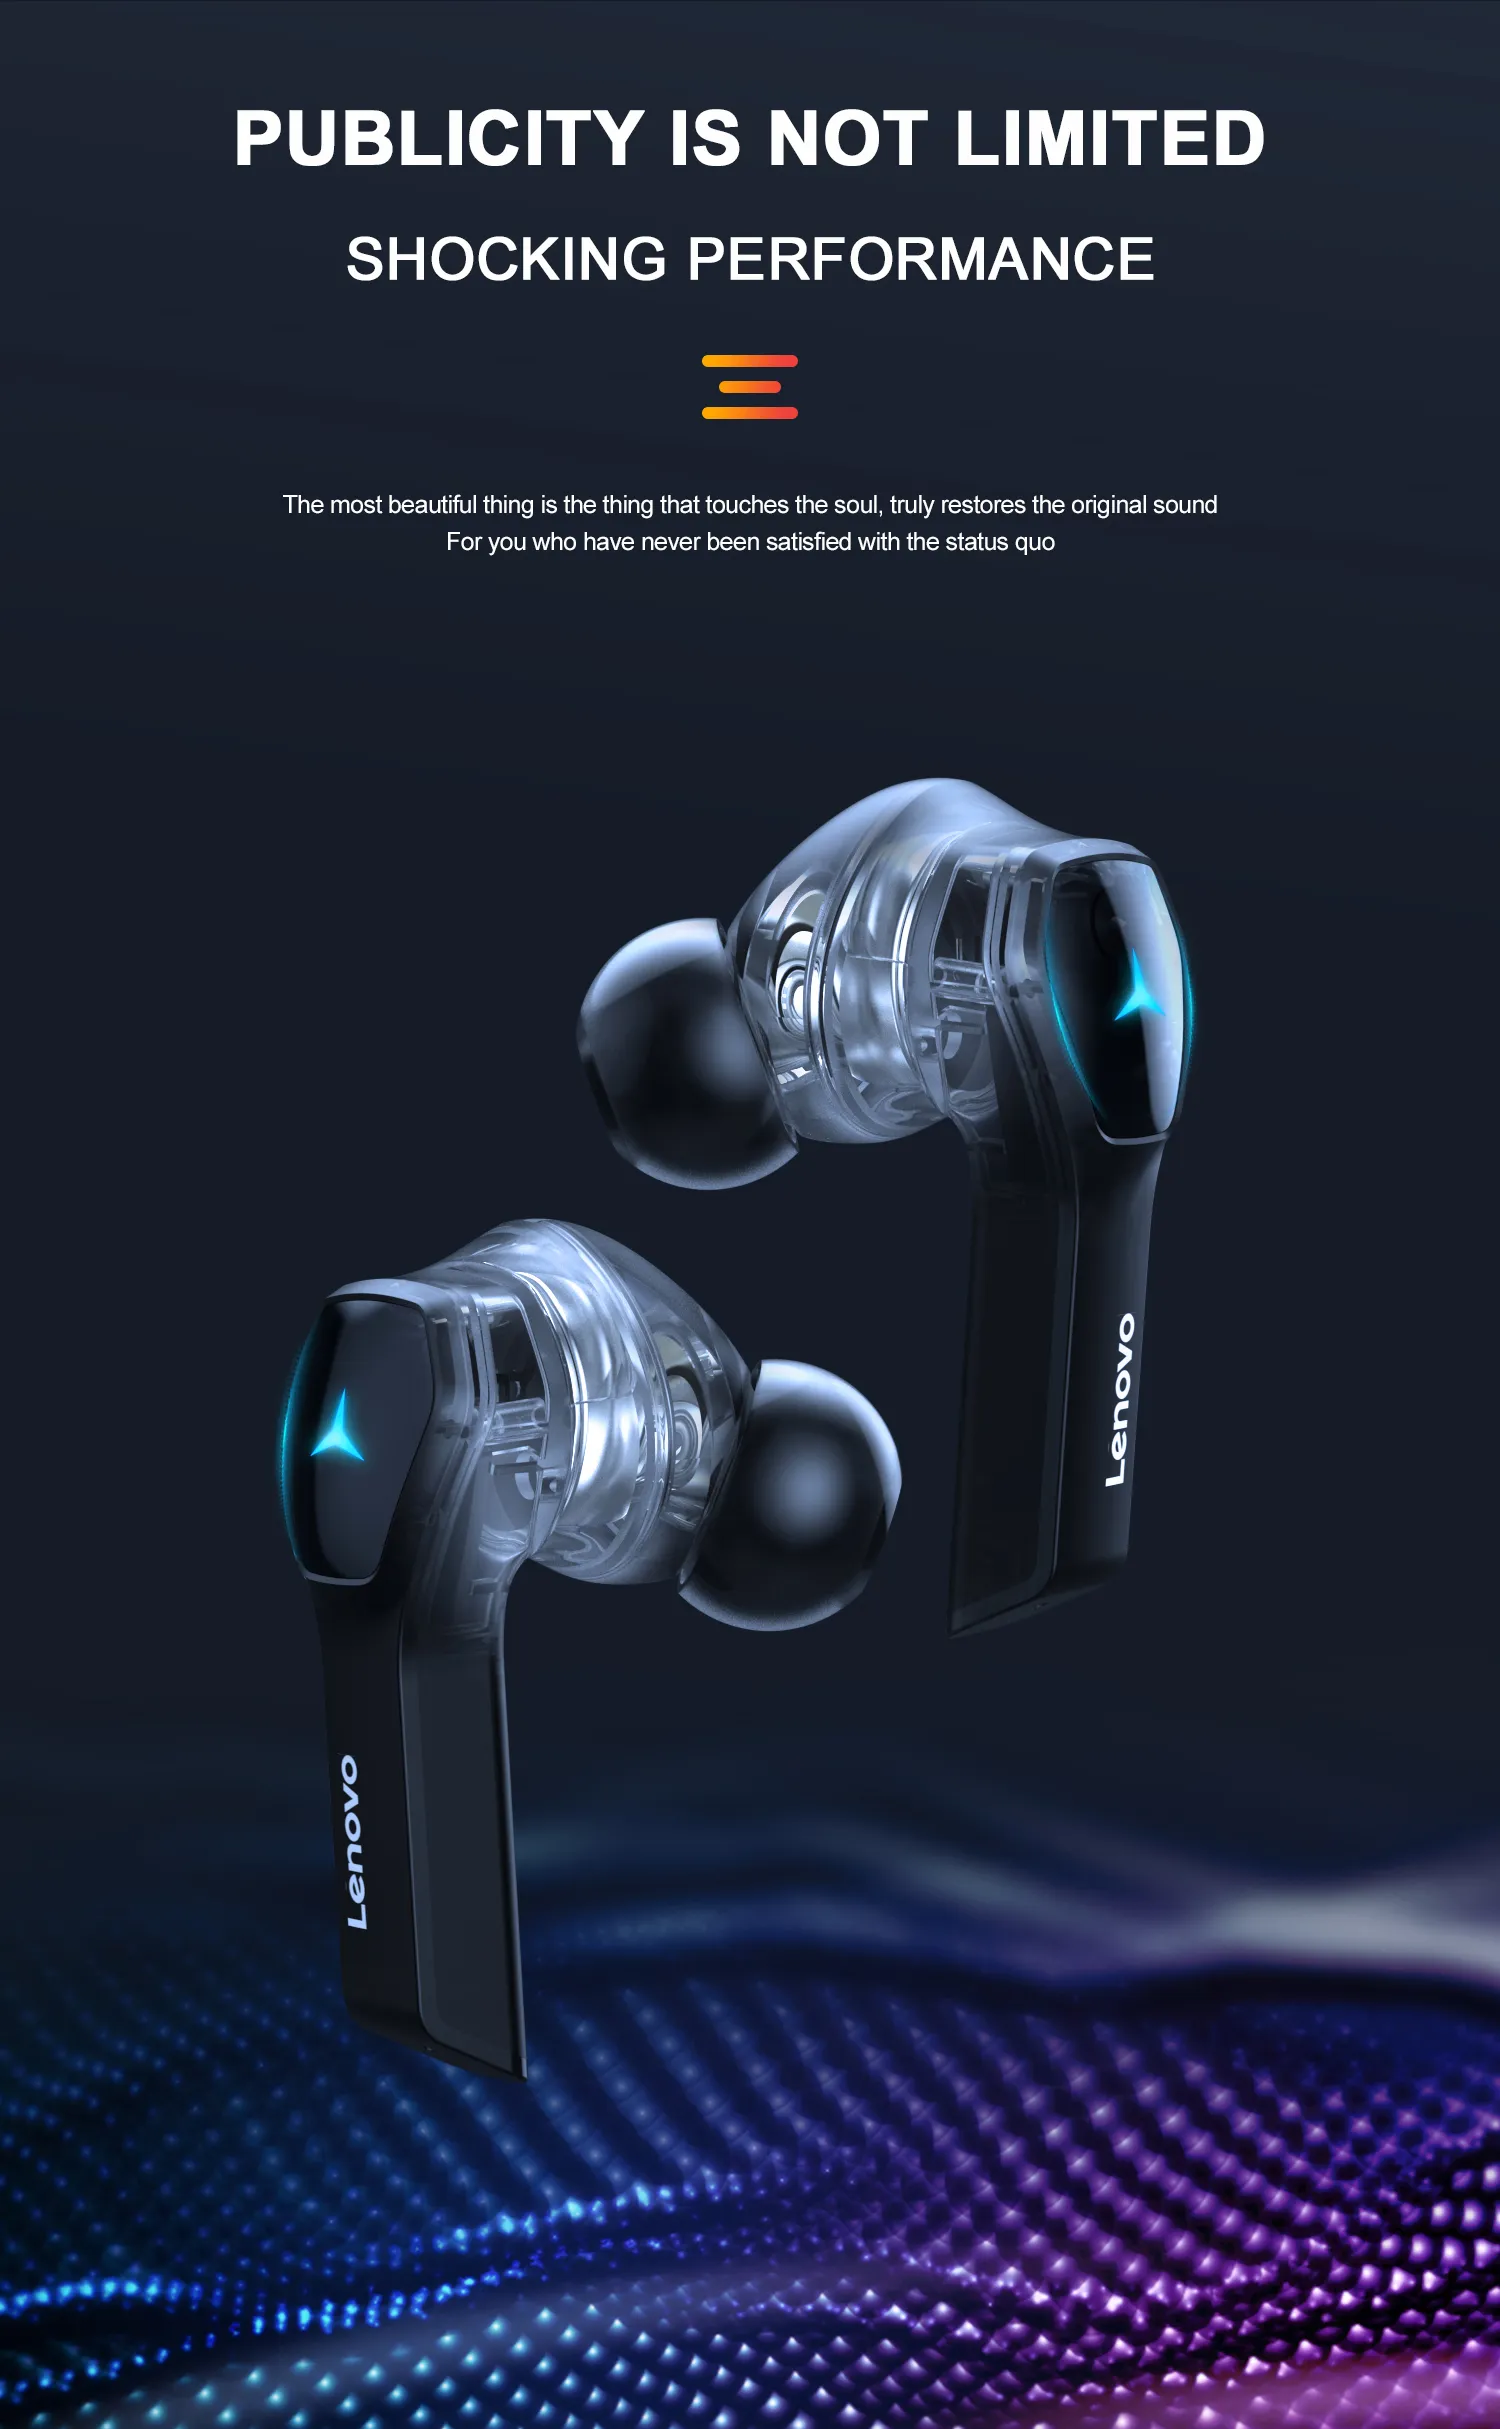 Format,Webp Lenovo &Lt;H1 Class=&Quot;Name&Quot;&Gt;Lenovo Hq08 Gaming Earbuds&Lt;/H1&Gt; Https://Www.youtube.com/Watch?V=Ygdzgaxtoai Bluetooth: 5.0 Sensitivity：98±3Db Speaker Impedance:32Ω Headphone Battery:30Mah Charging Bin Battery:400Mah Play Time:about 4 Hours &Lt;A Href=&Quot;Https://Lablaab.com/?S=Earbuds&Amp;Post_Type=Product&Amp;Product_Cat=0&Quot;&Gt;More Products&Lt;/A&Gt; &Lt;B&Gt;We Also Provide International Wholesale And Retail Shipping To All Gcc Countries: Saudi Arabia, Qatar, Oman, Kuwait, Bahrain. &Lt;/B&Gt; &Lt;Pre&Gt;&Lt;/Pre&Gt; Lenovo Hq08 Gaming Earbuds Lenovo Hq08 Gaming Earbuds